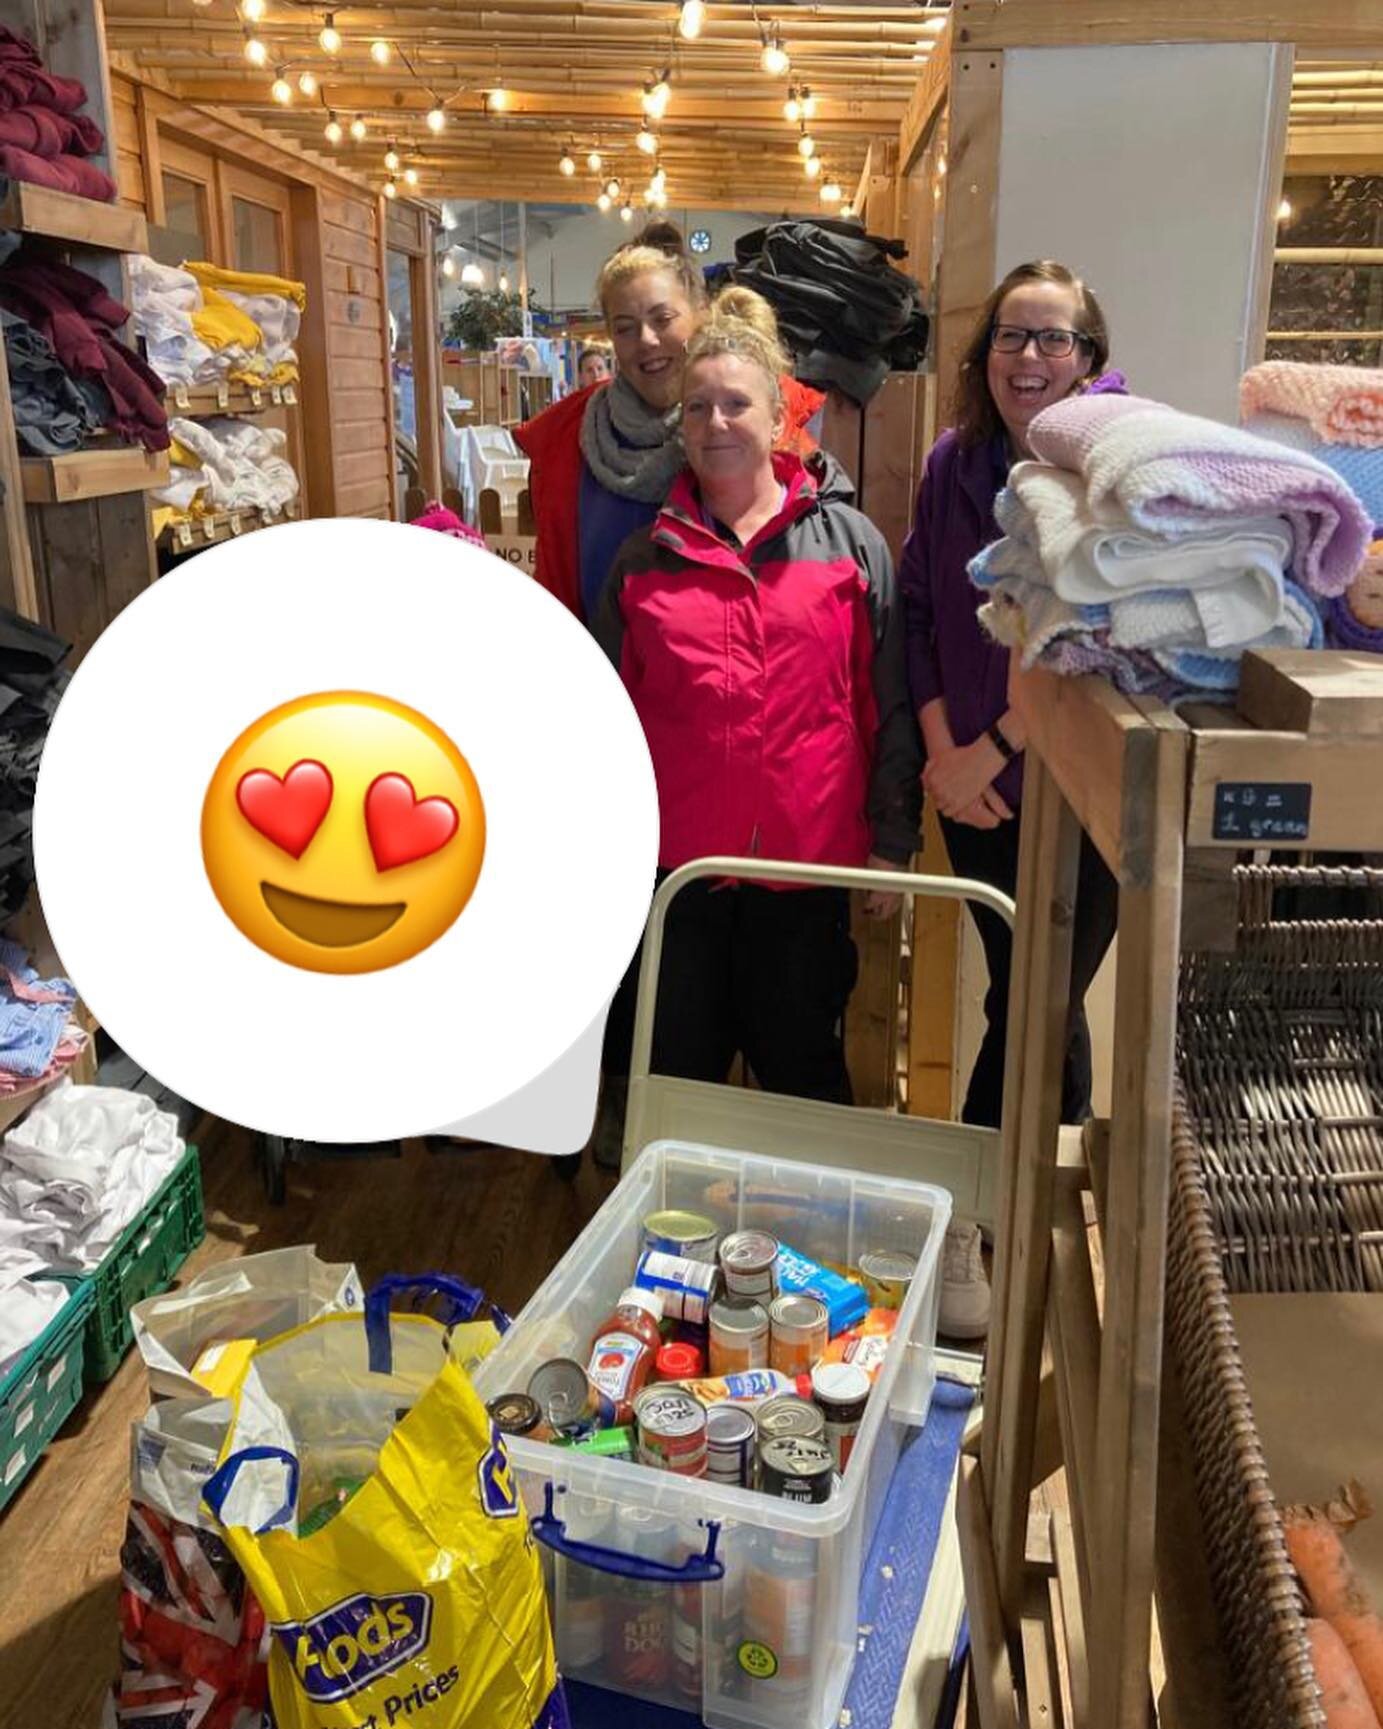 Fairfield have just delivered our Harvest Haul to Hope Pantry Food Bank at the Hideaway! They were very impressed and thankful. Thank you to everyone who contributed, I&rsquo;m sure it will be well received by those who need it most. 👍